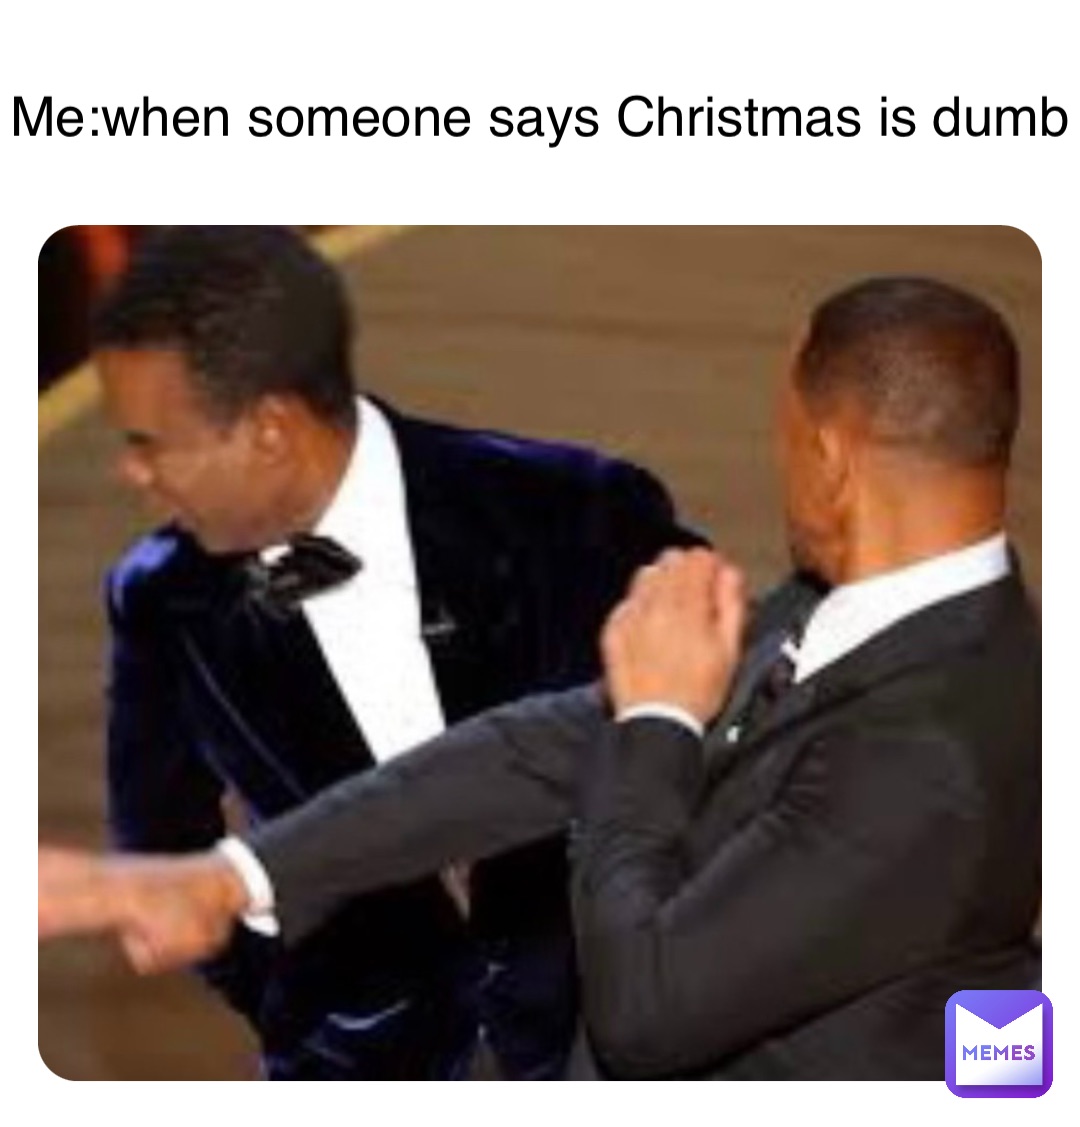 Me:when someone says Christmas is dumb